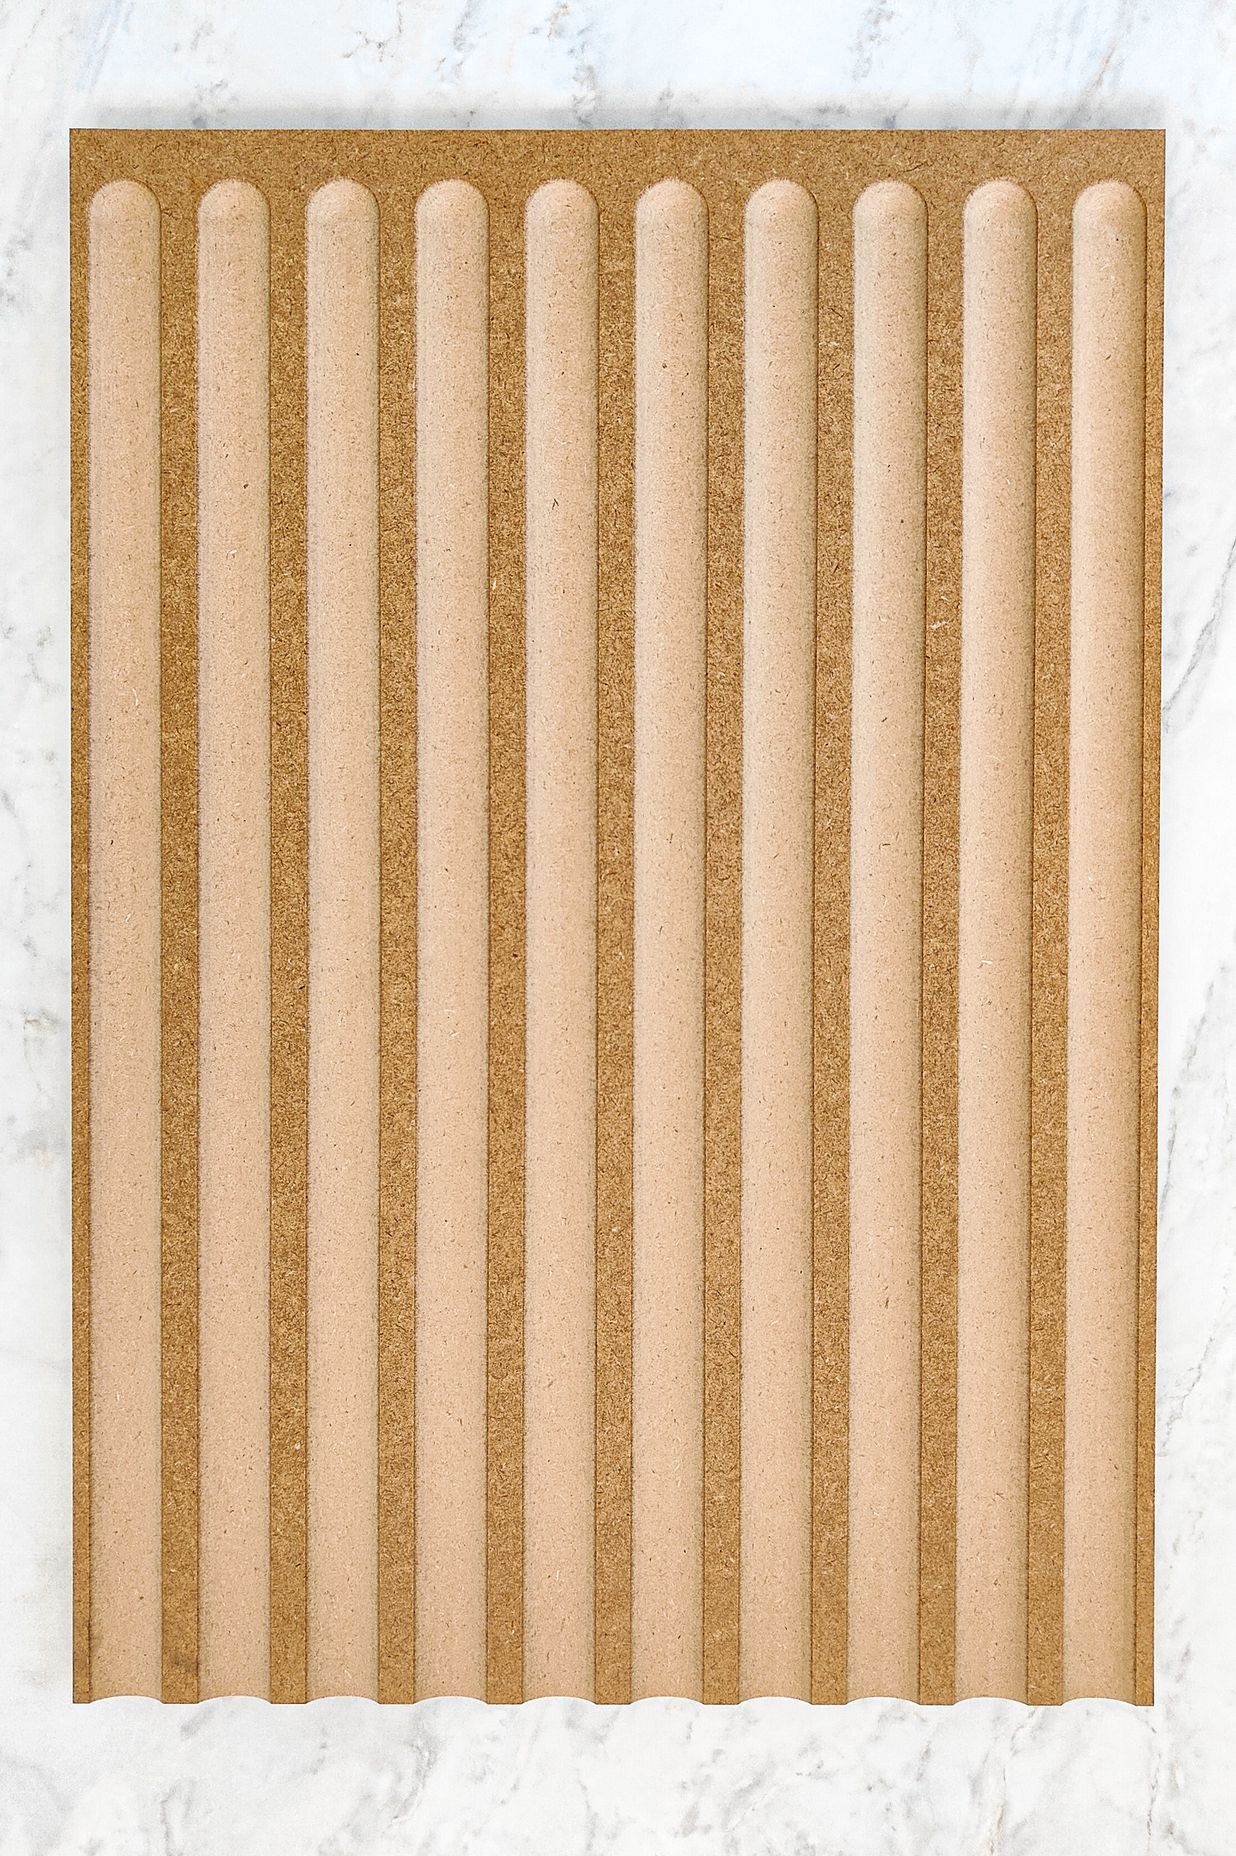 The 'Alaska' from the Optidoor range features a channel groove, giving a classic, radiator look.